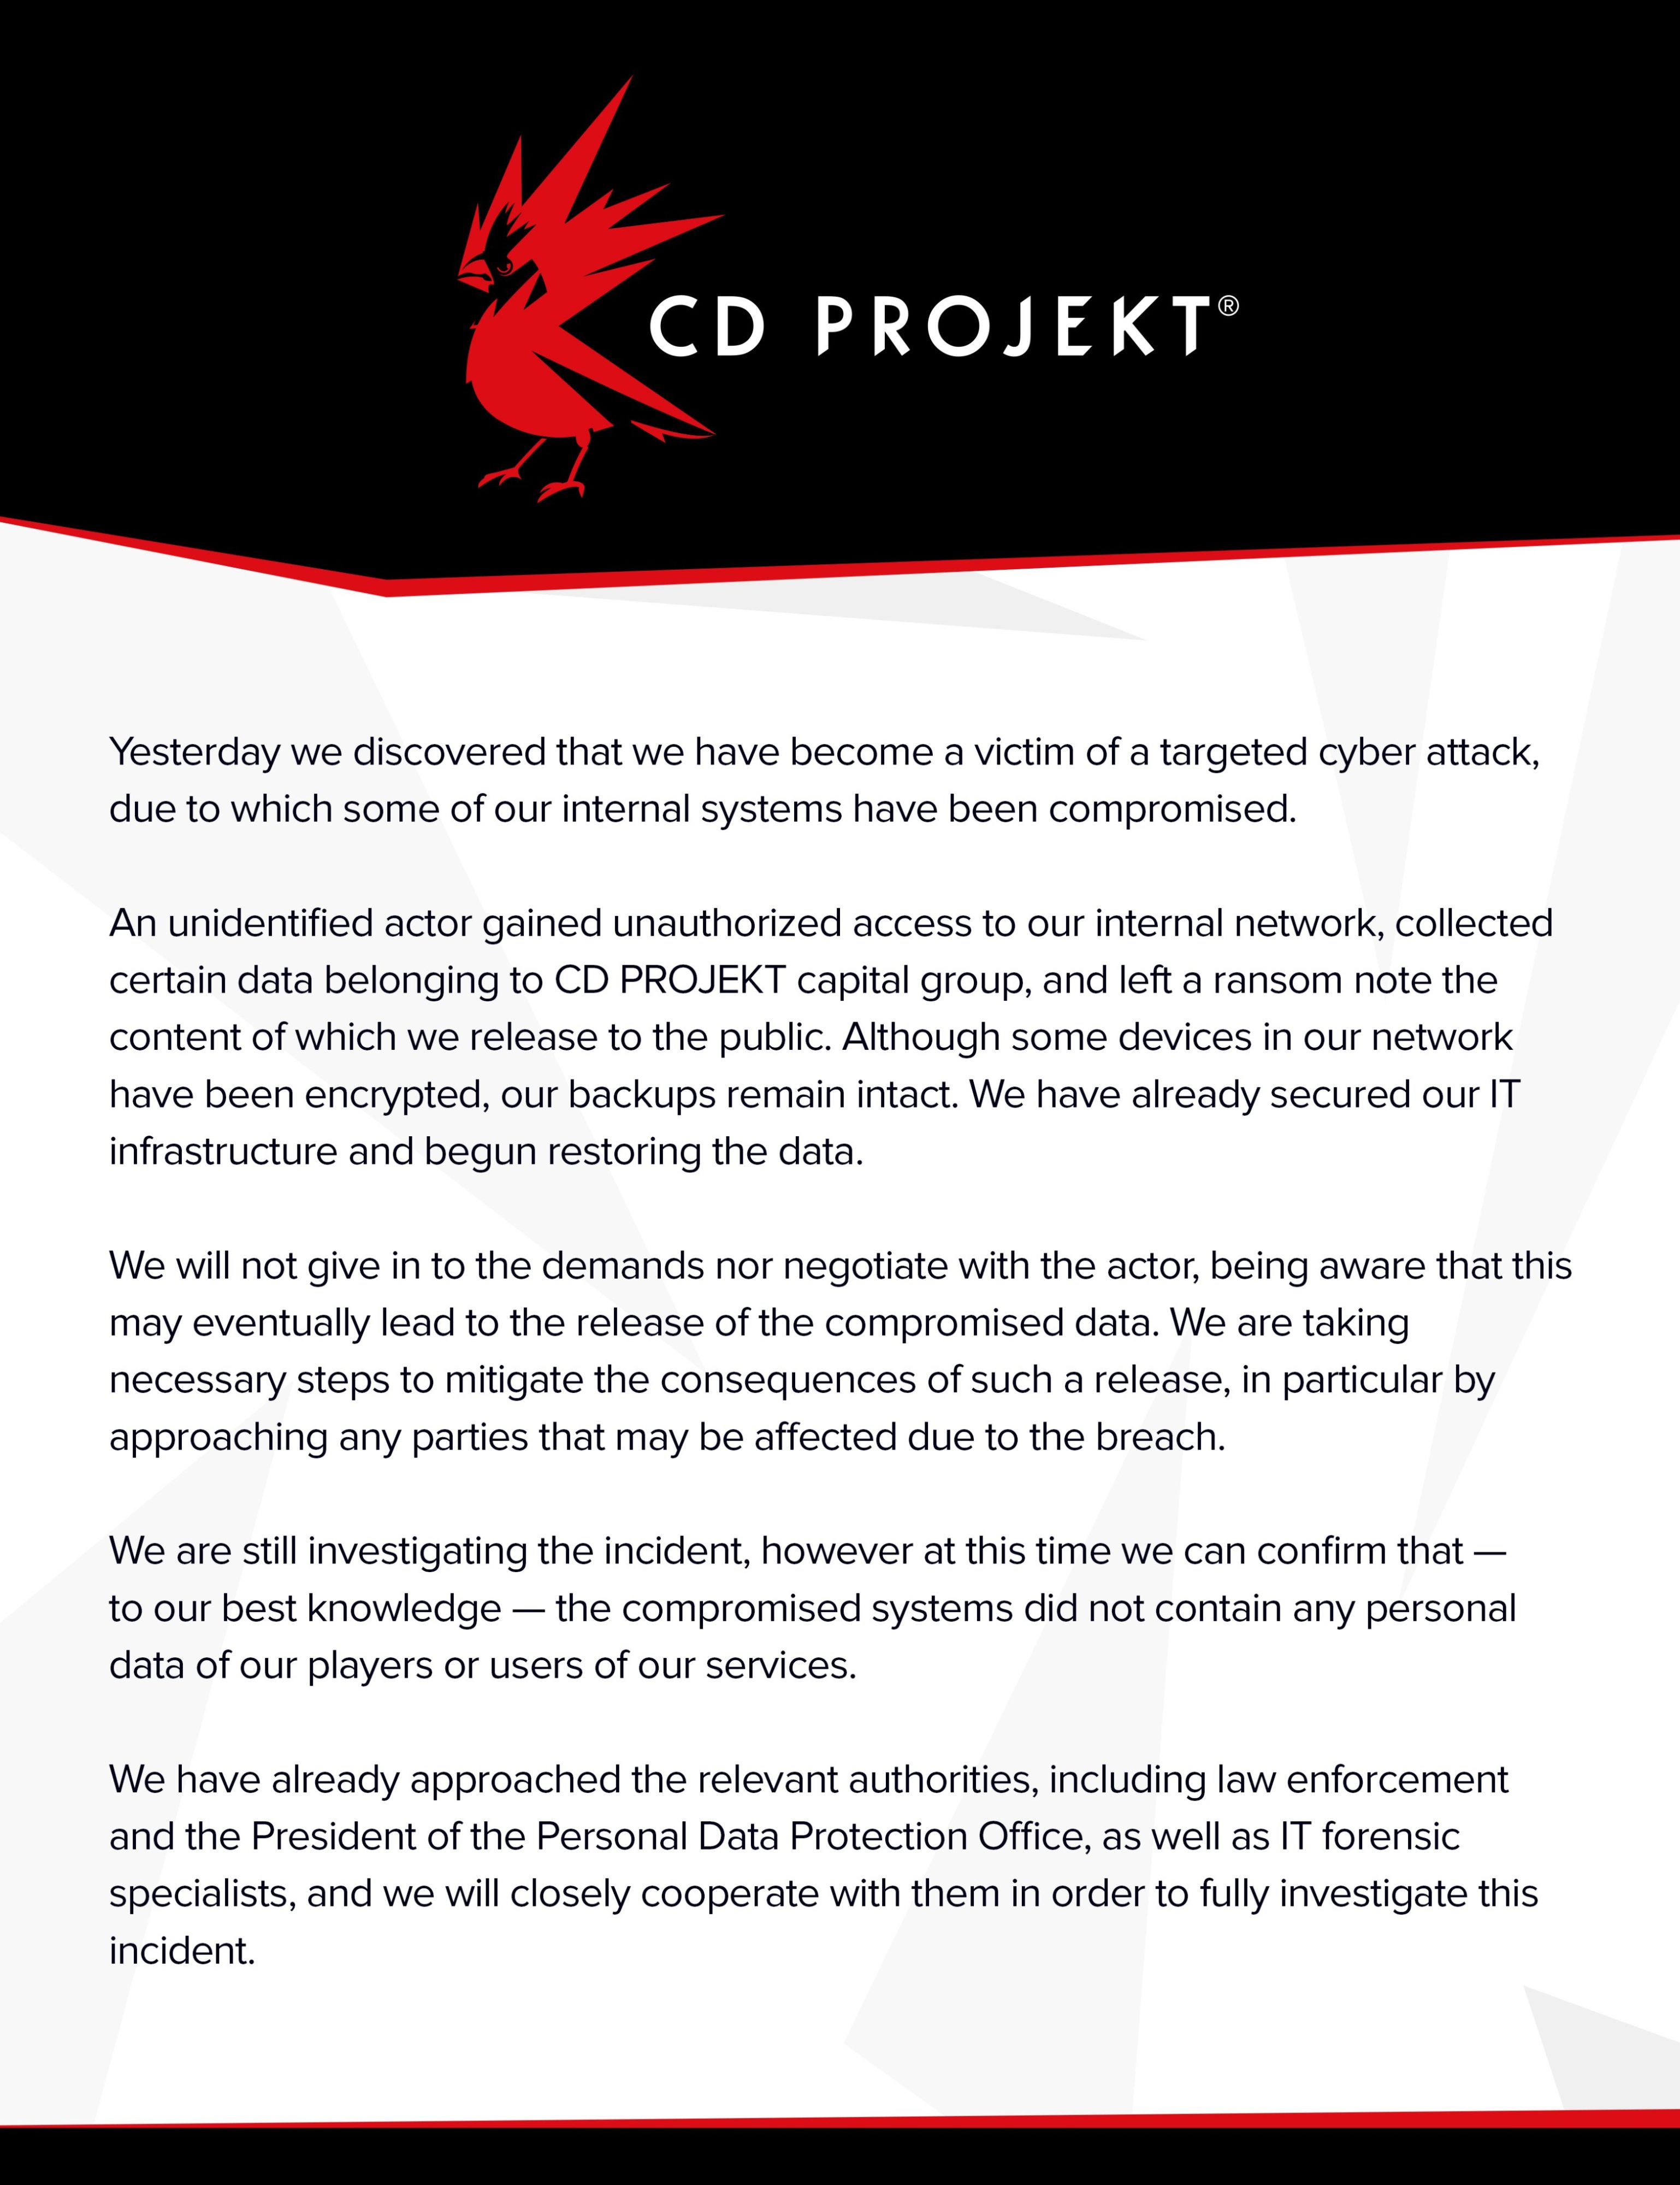 CD Projekt Red using DMCA notices to try to cover leaks of their source  Code 